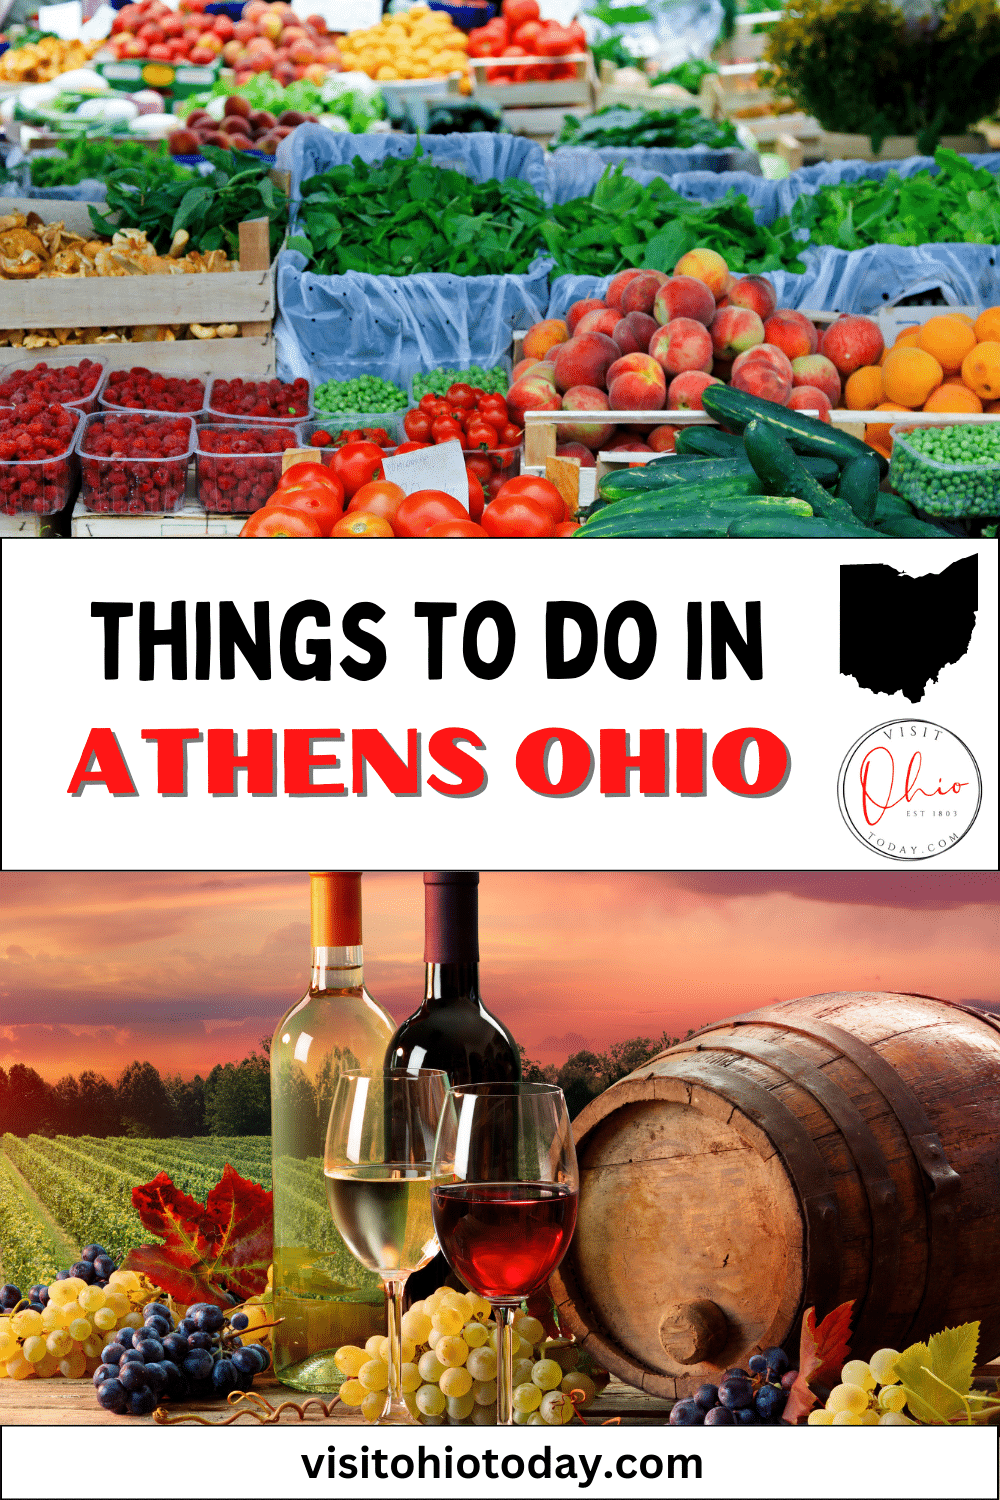 vertical image with a photo of a farmers market and a photo of some bottles of wine, a wine barrel, a glass of wine, some grapes and leaves on a wooden table. A white strip across the middle has the text Things to do in Athens Ohio. Images via Canva pro license